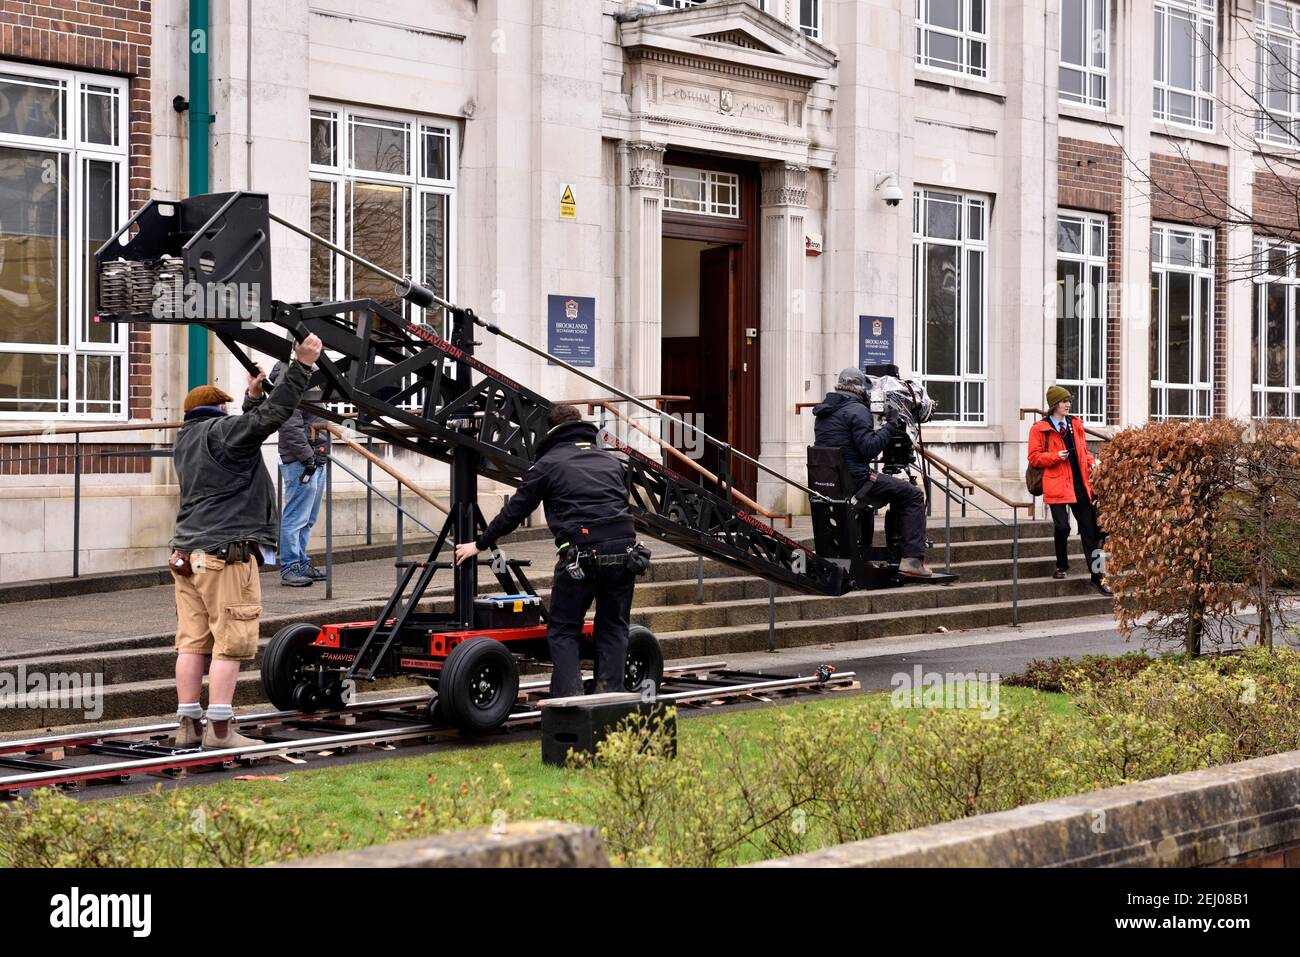 Location filming of Alex Rider story, cameraman on crane platform, crew taking outdoor shoot at Brookland Secondary School for Amazon Prime Stock Photo